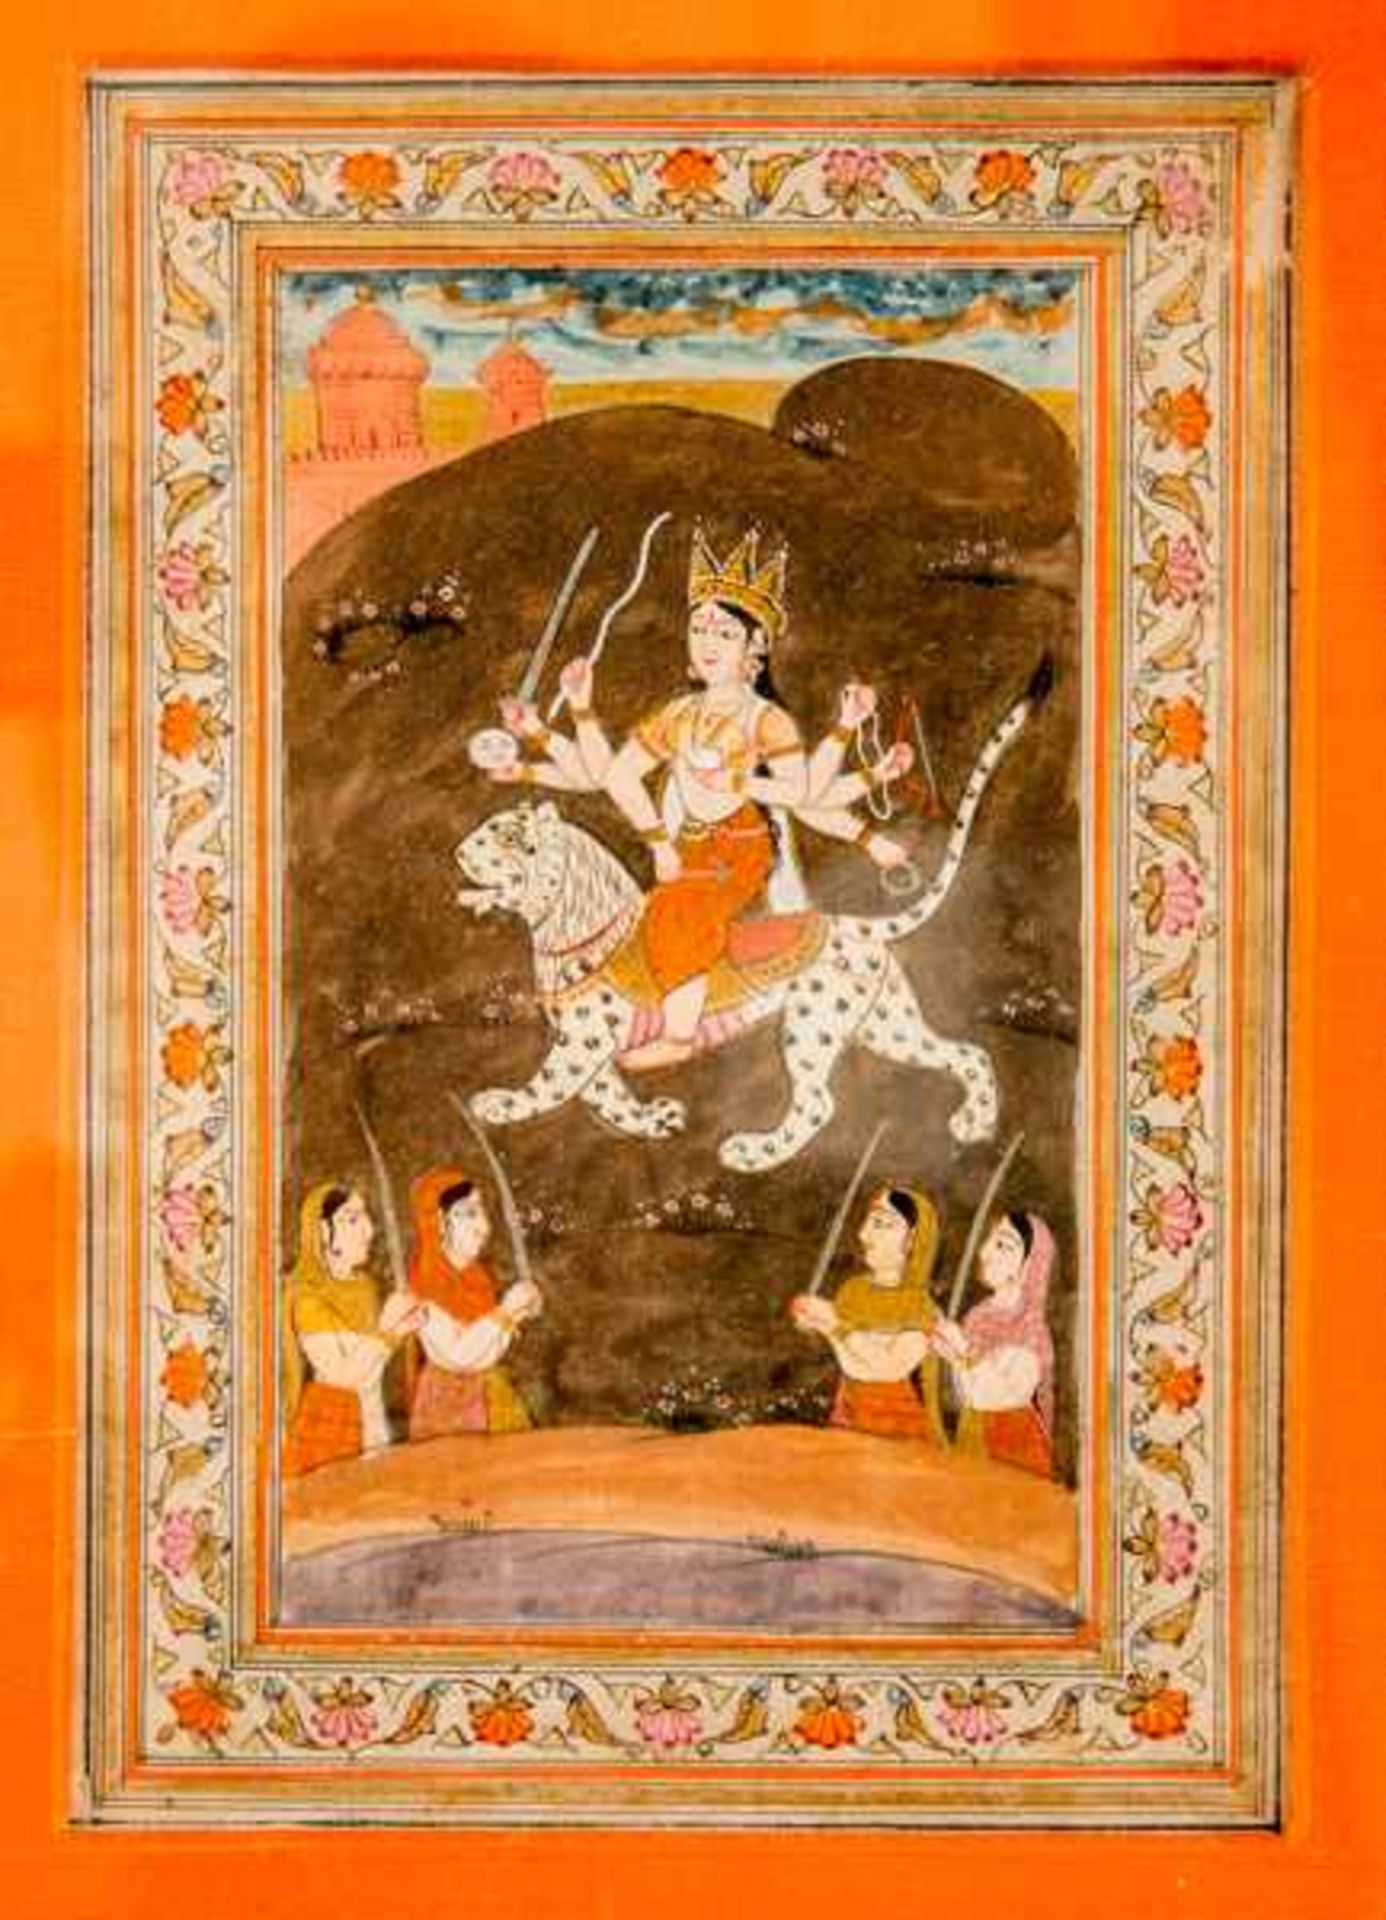 THE BLACK GODDESS KALI Miniature painting on paper. India, 19th cent.Kali is in the center of this